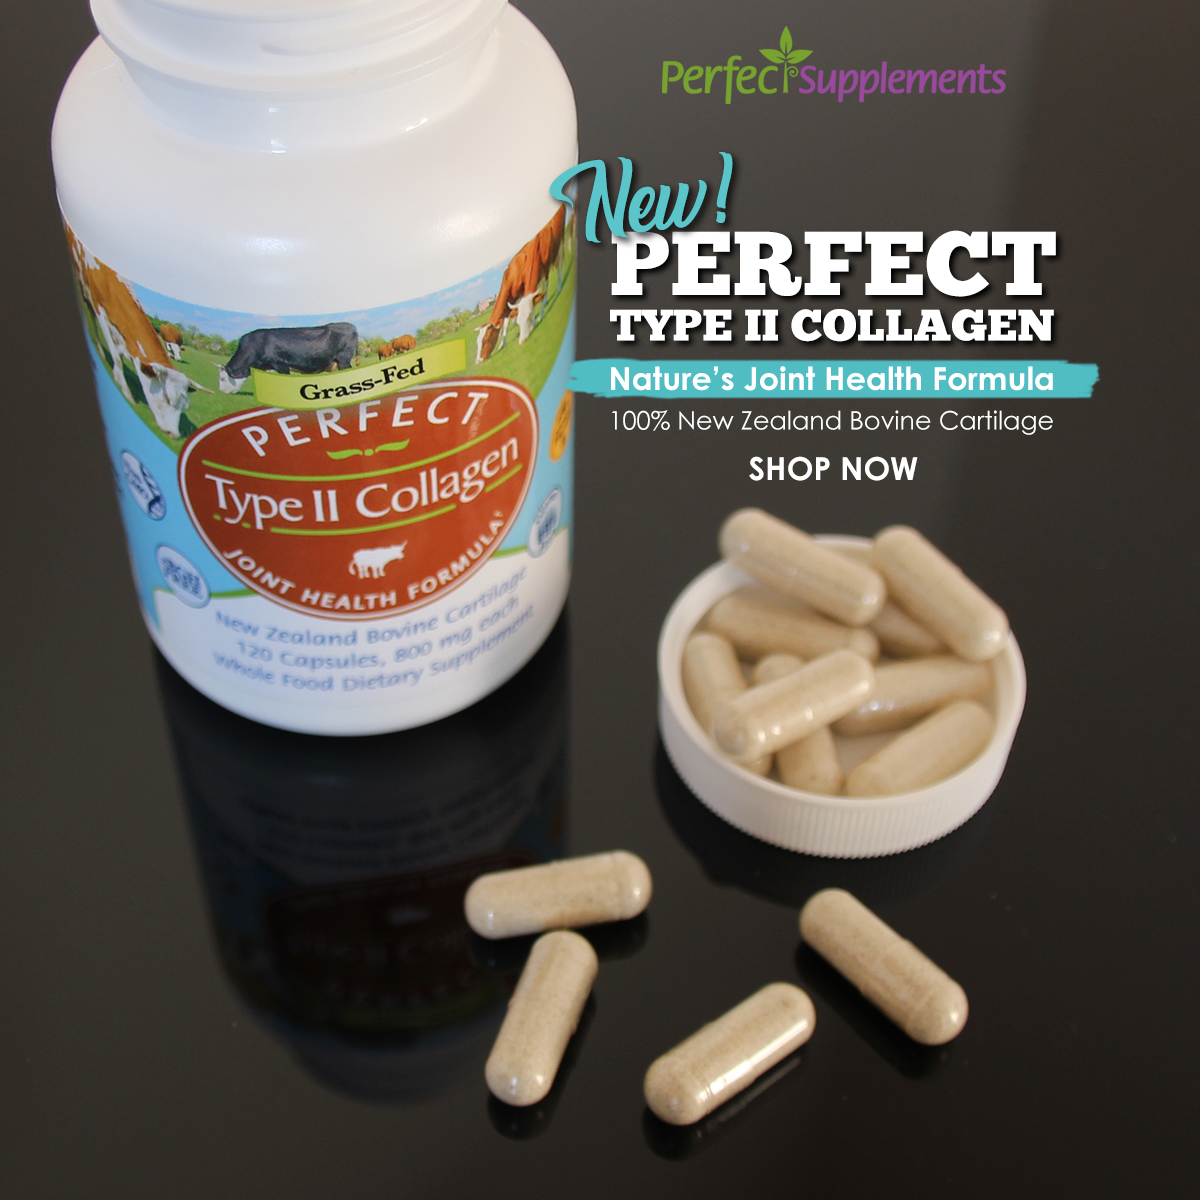 Perfect Type II Collagen (Bovine Cartilage) - Bottle and Capsules IMAGE TOP View (New Zealand Copy) - 1200x1200